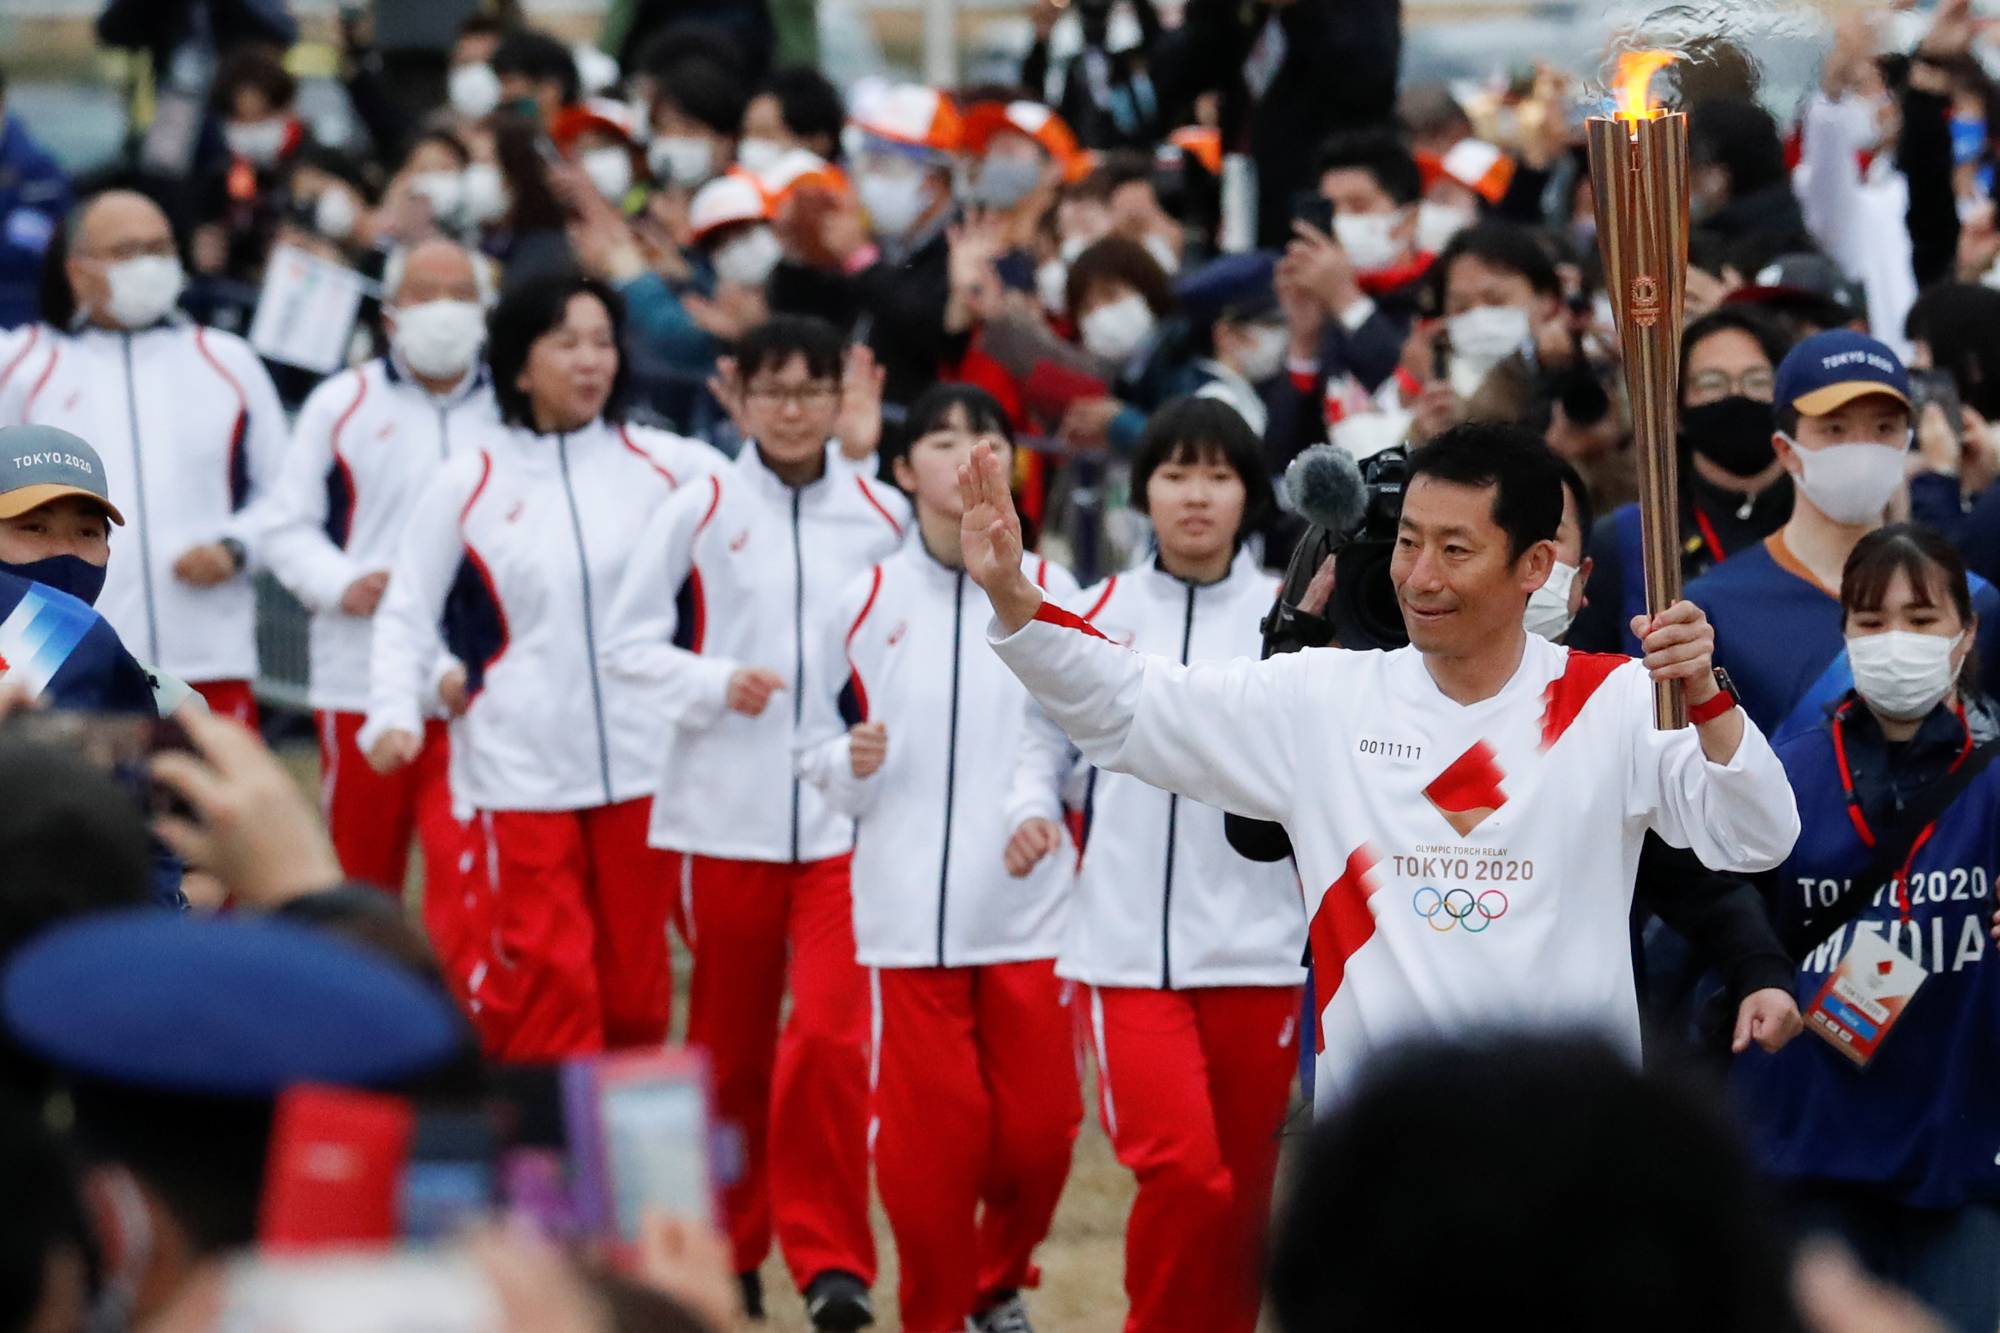 Japanese aerobatics pilot Yoshihide Muroya carries the Olympic torch at Hibarigahara Festival Site in Minamisoma, Fukushima Prefecture, during the last leg of the first day of the Tokyo 2020 Olympic torch relay last month. | REUTERS